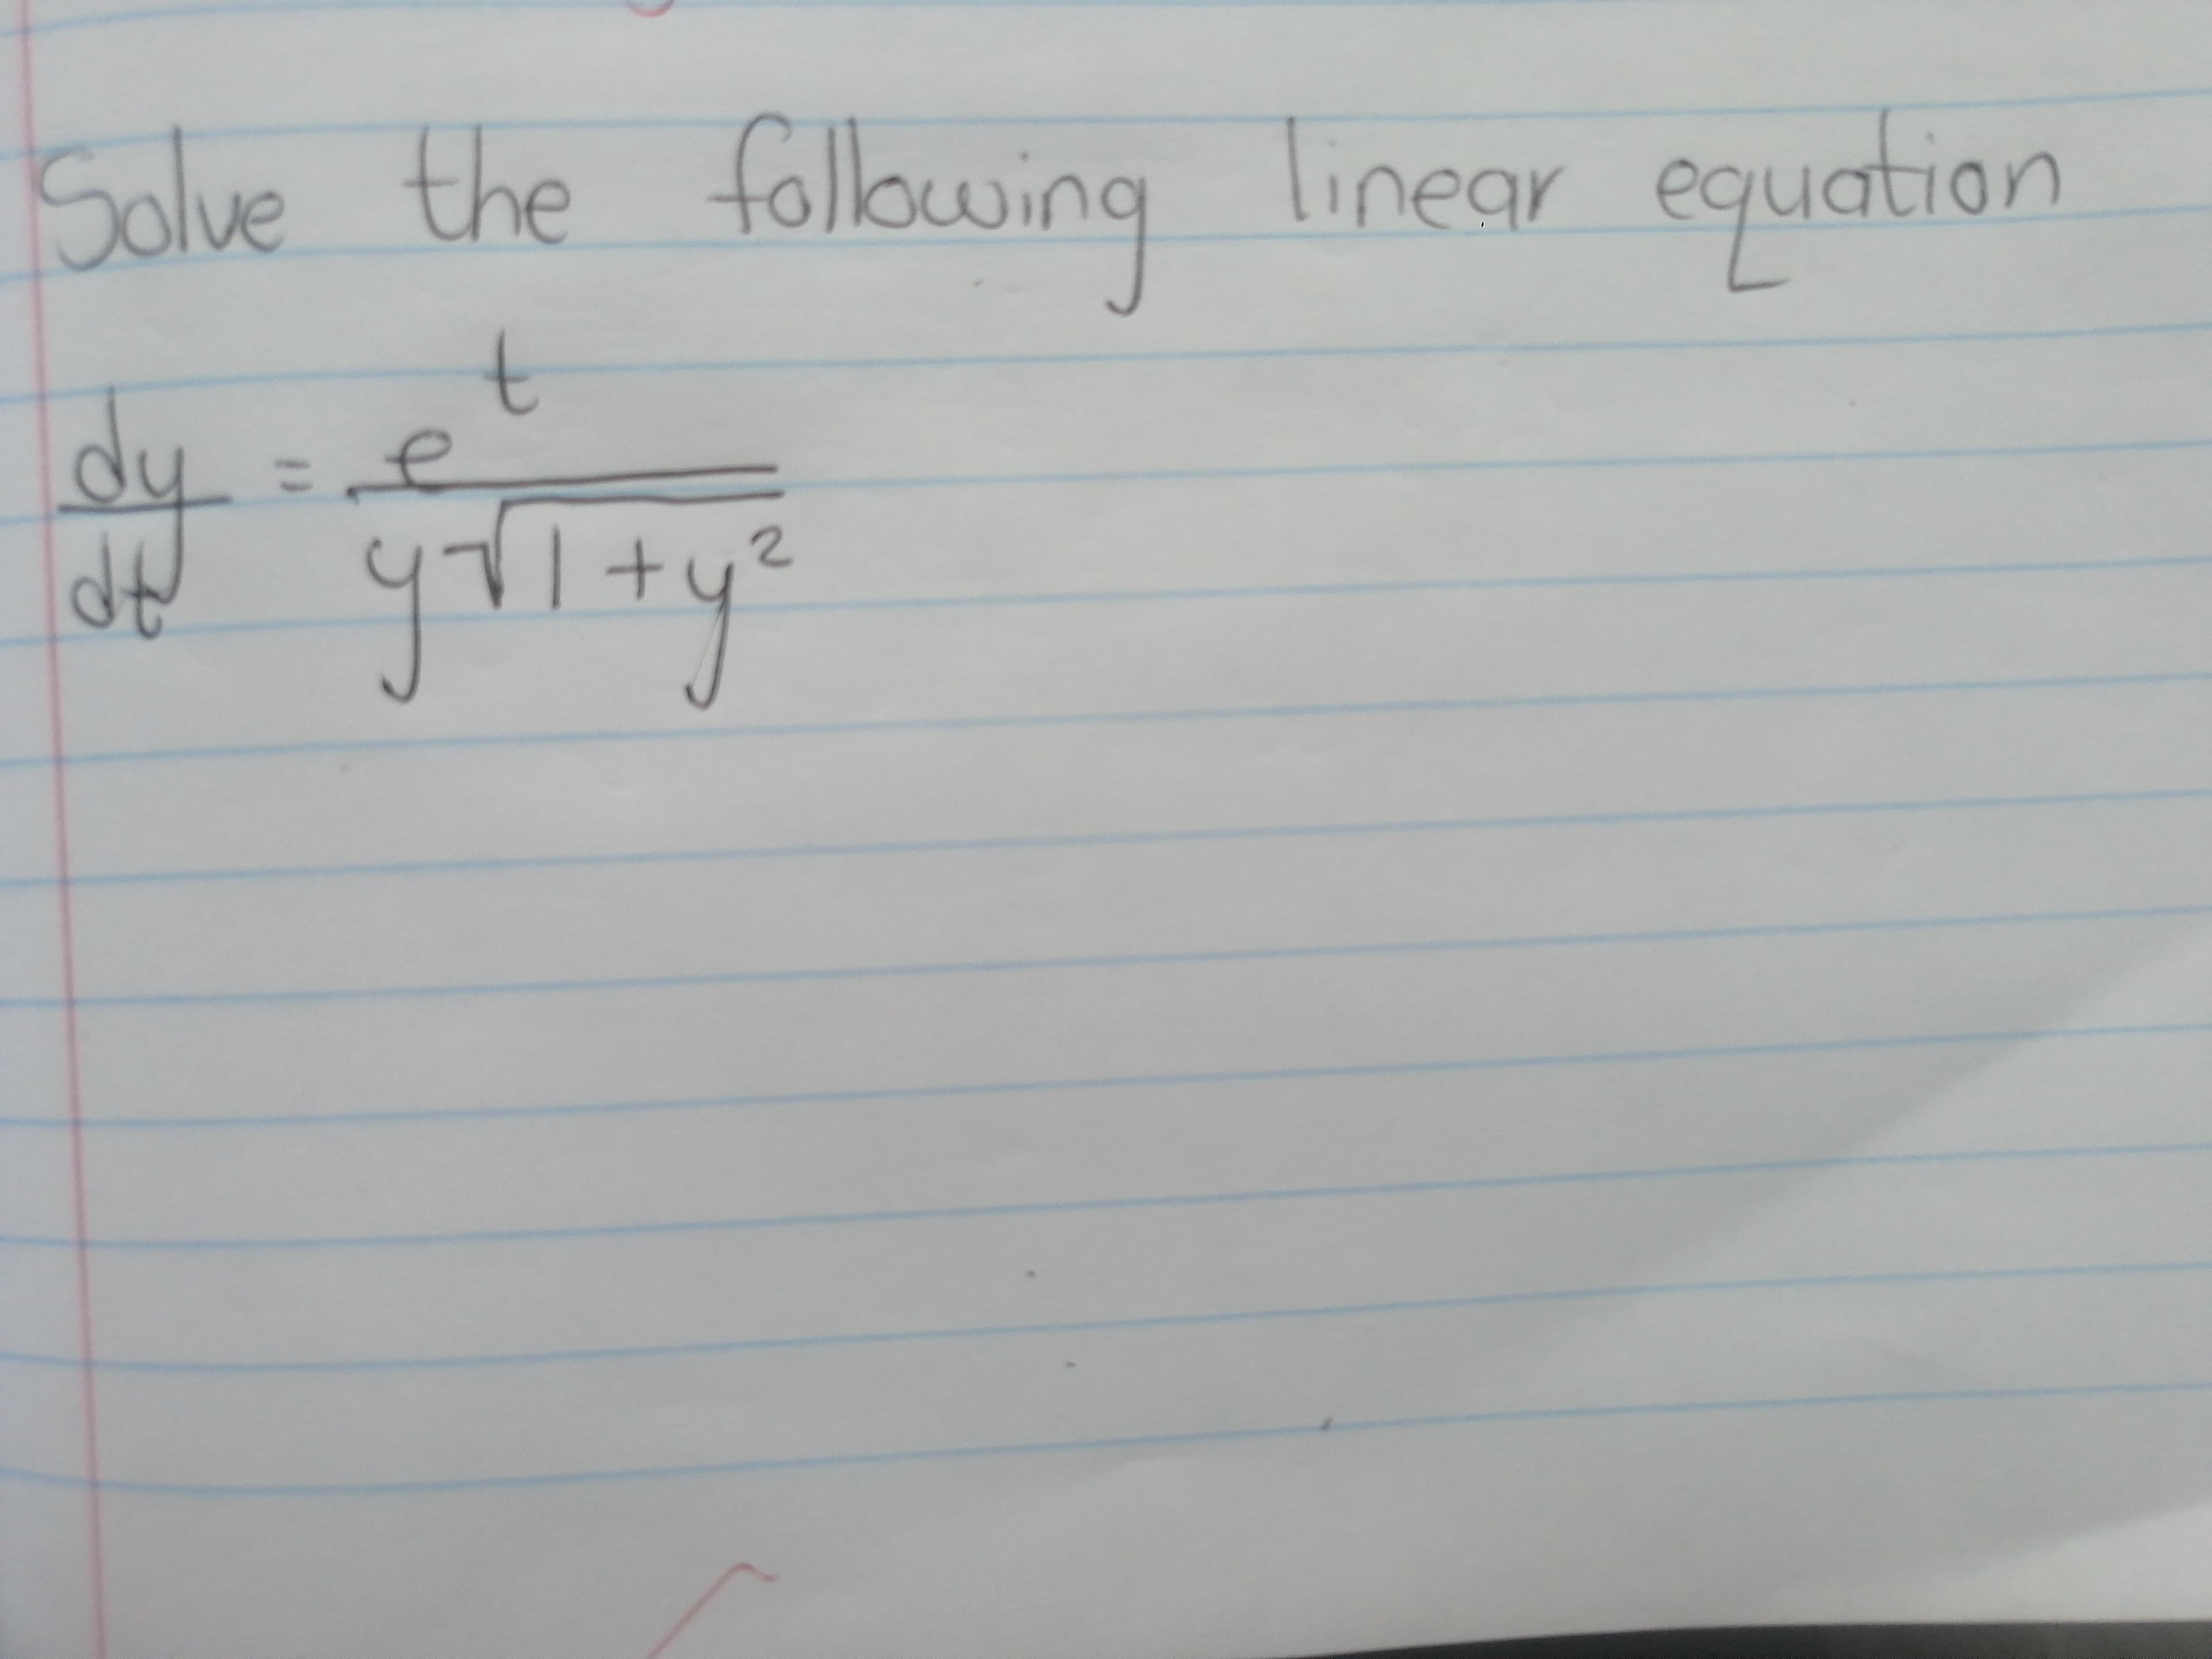 Solve ing linear equation
the follow
linegr equation
Wir
